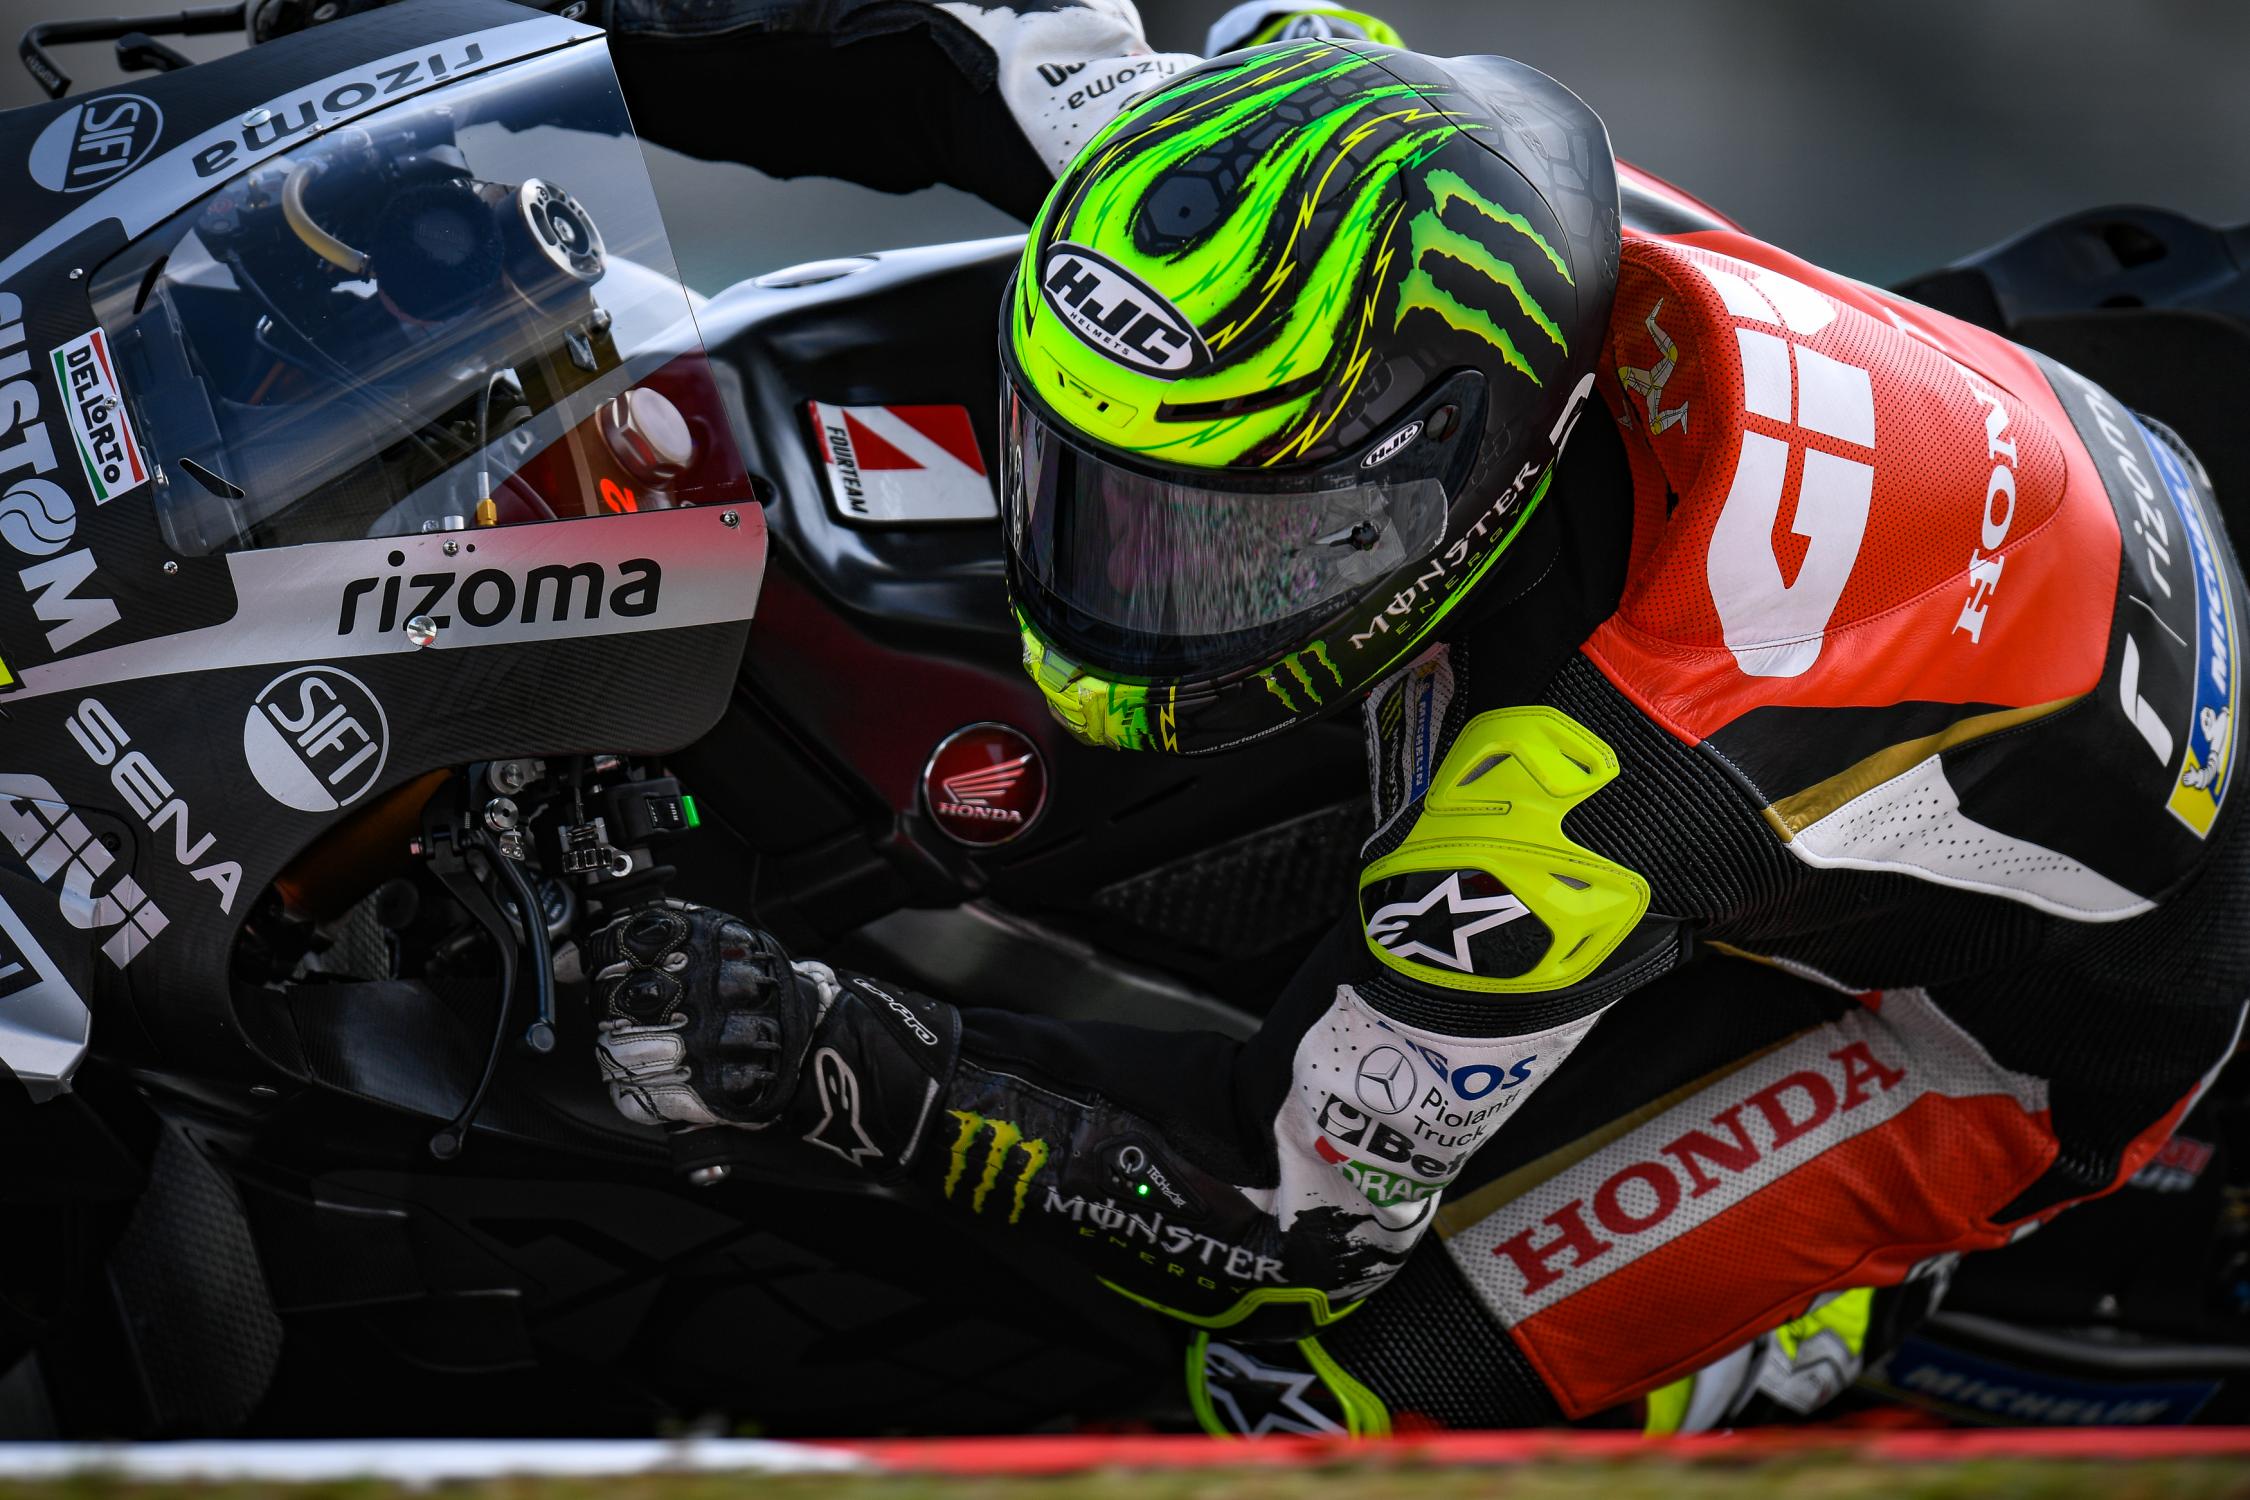 Crutchlow fastest Honda on first day in Sepang